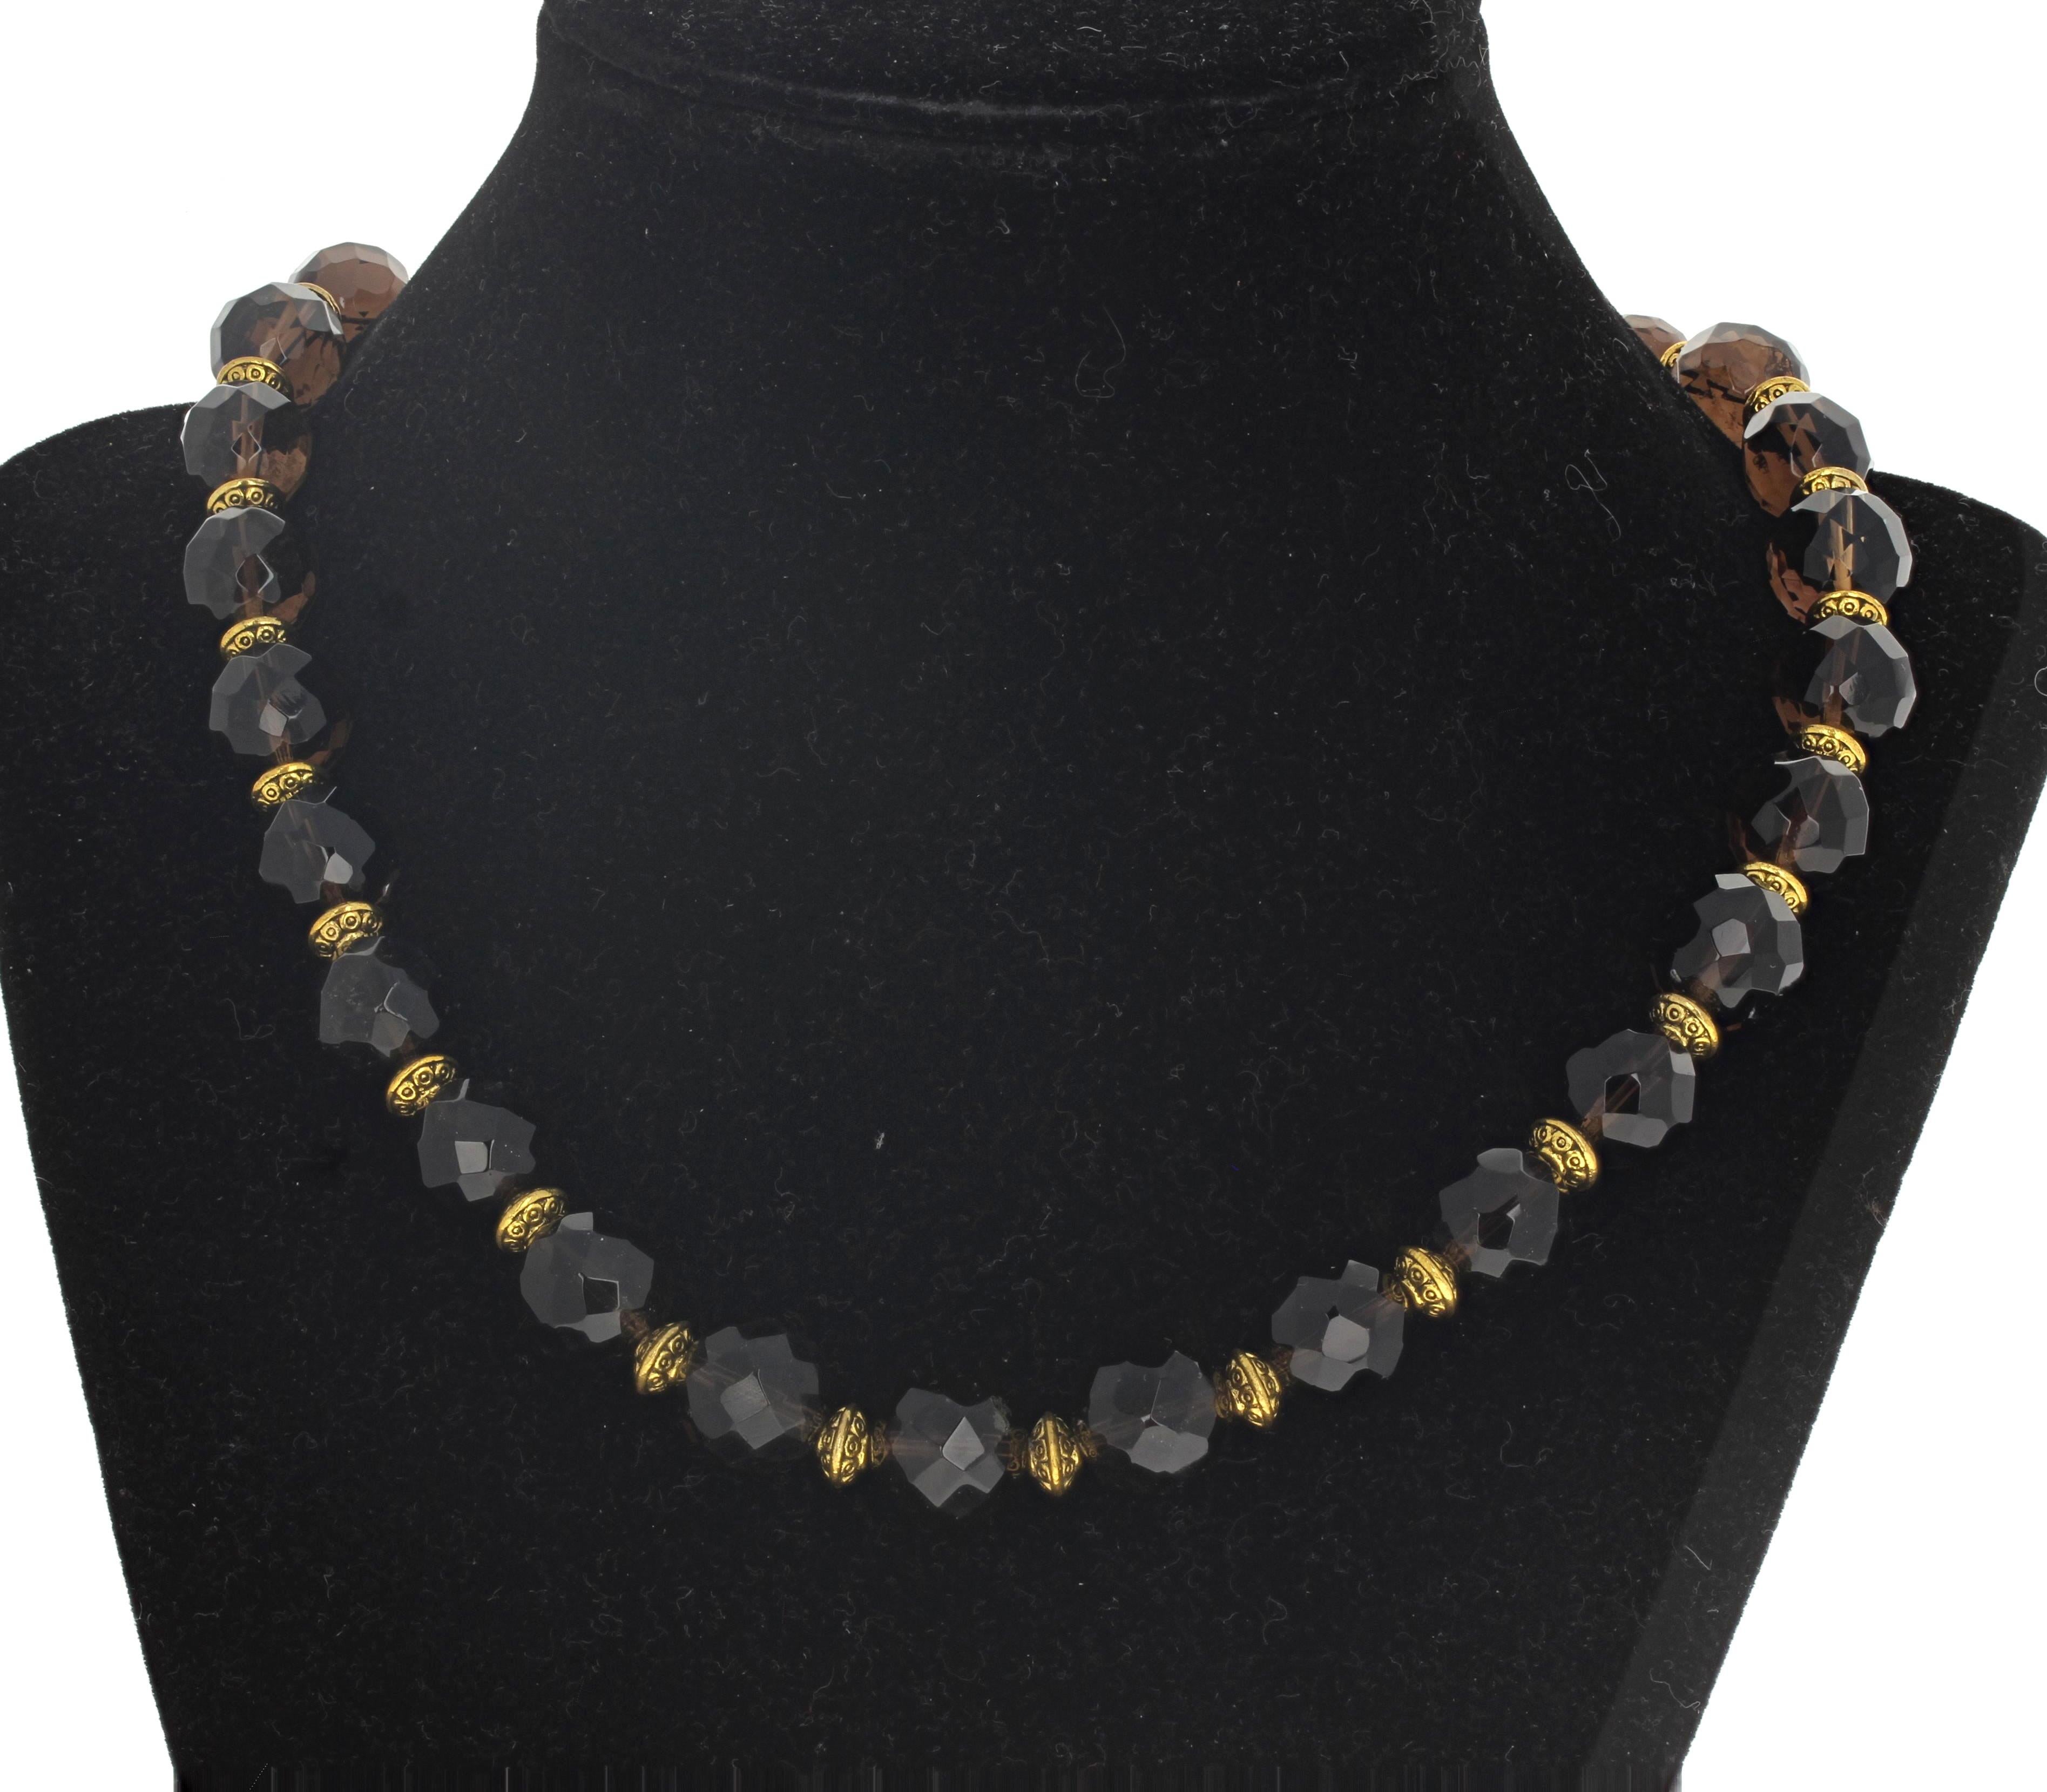 Mixed Cut AJD Magnificent Multi-cut Polished Beautiful Intense Smoky Quartz Necklace For Sale